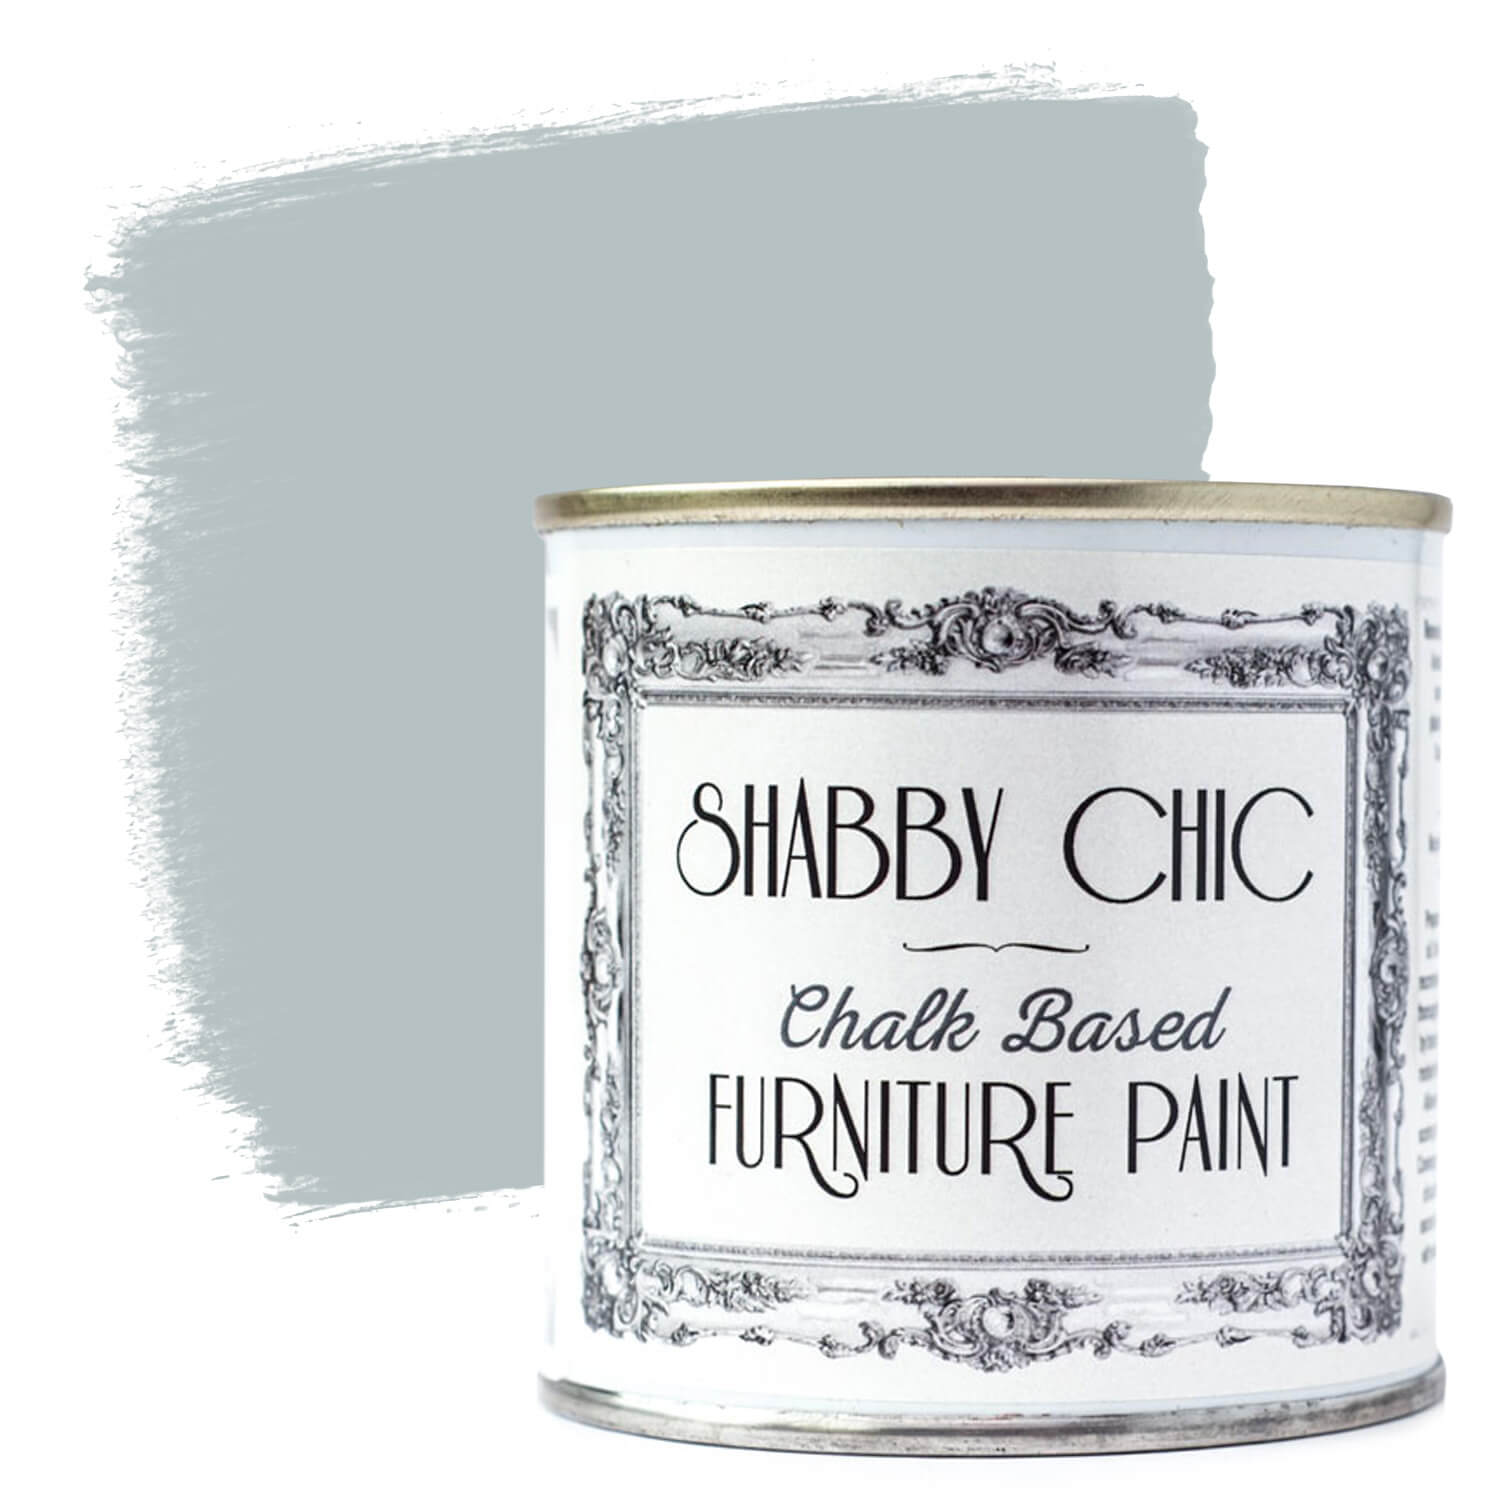 Shabby Chic Furniture Paint in Winter Grey